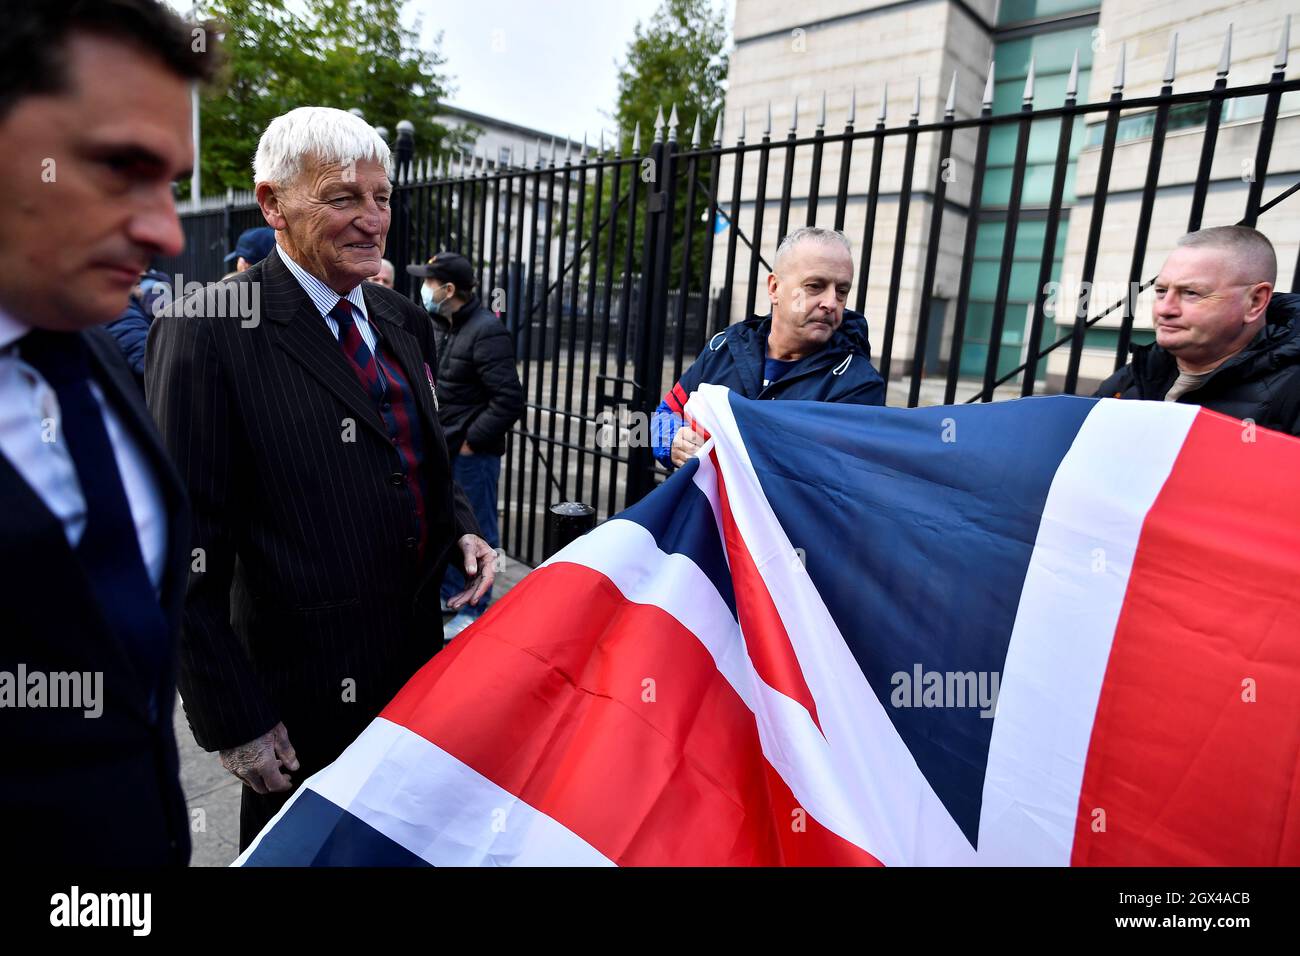 British Army veteran Dennis Hutchings speaks to supporters outside Laganside Courts as he arrives for his hearing for the 1974 Northern Ireland Troubles related death of John Pat Cunningham, in Belfast, Northern Ireland, October 4, 2021. REUTERS/Clodagh Kilcoyne Stock Photo